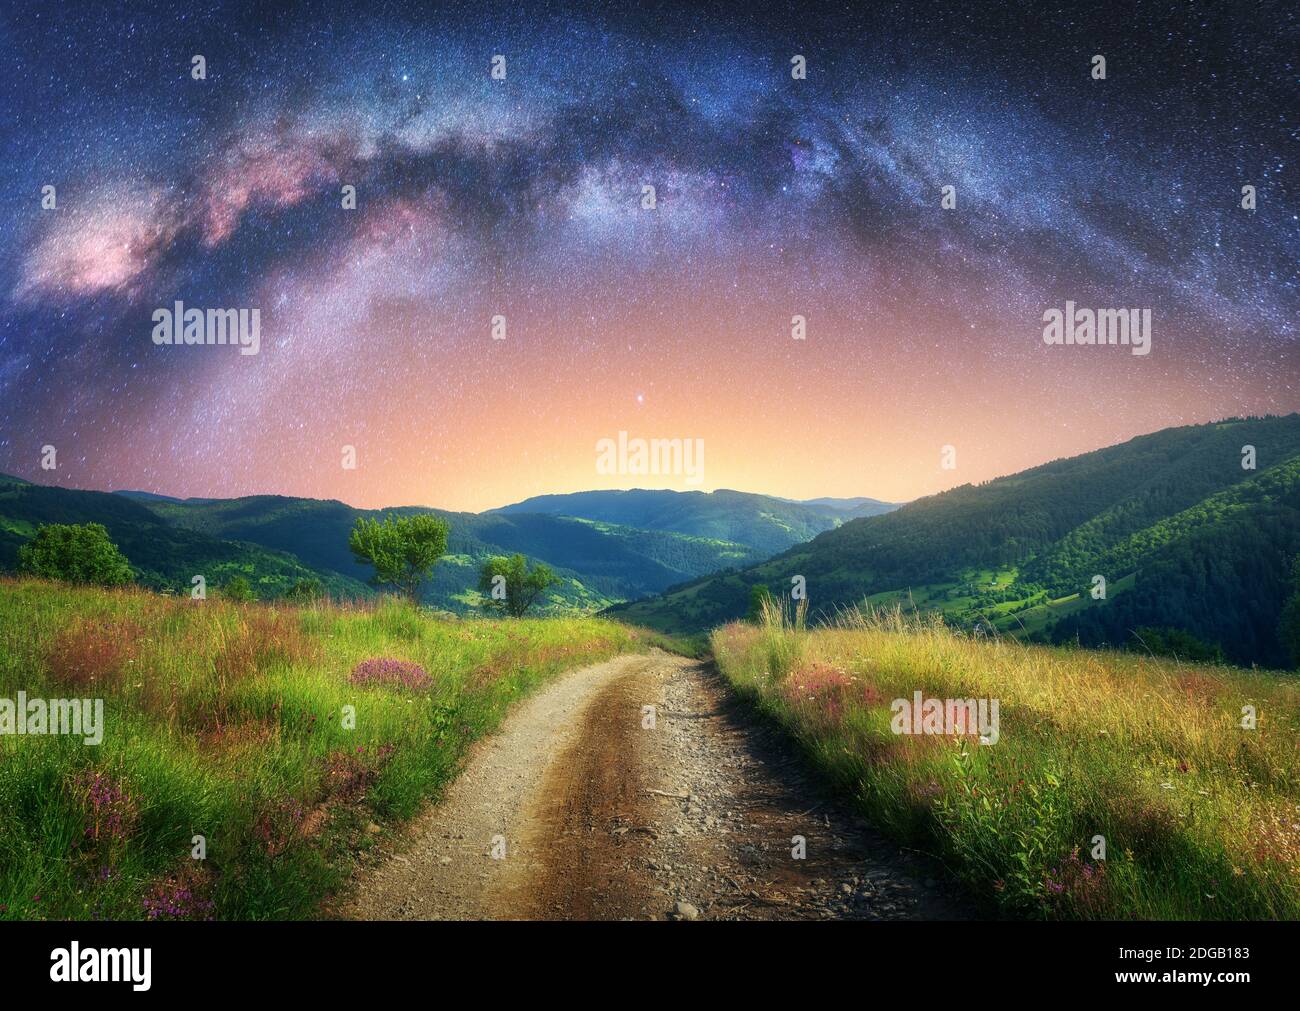 Arched Milky Way over the dirt mountain road in summer at night Stock Photo